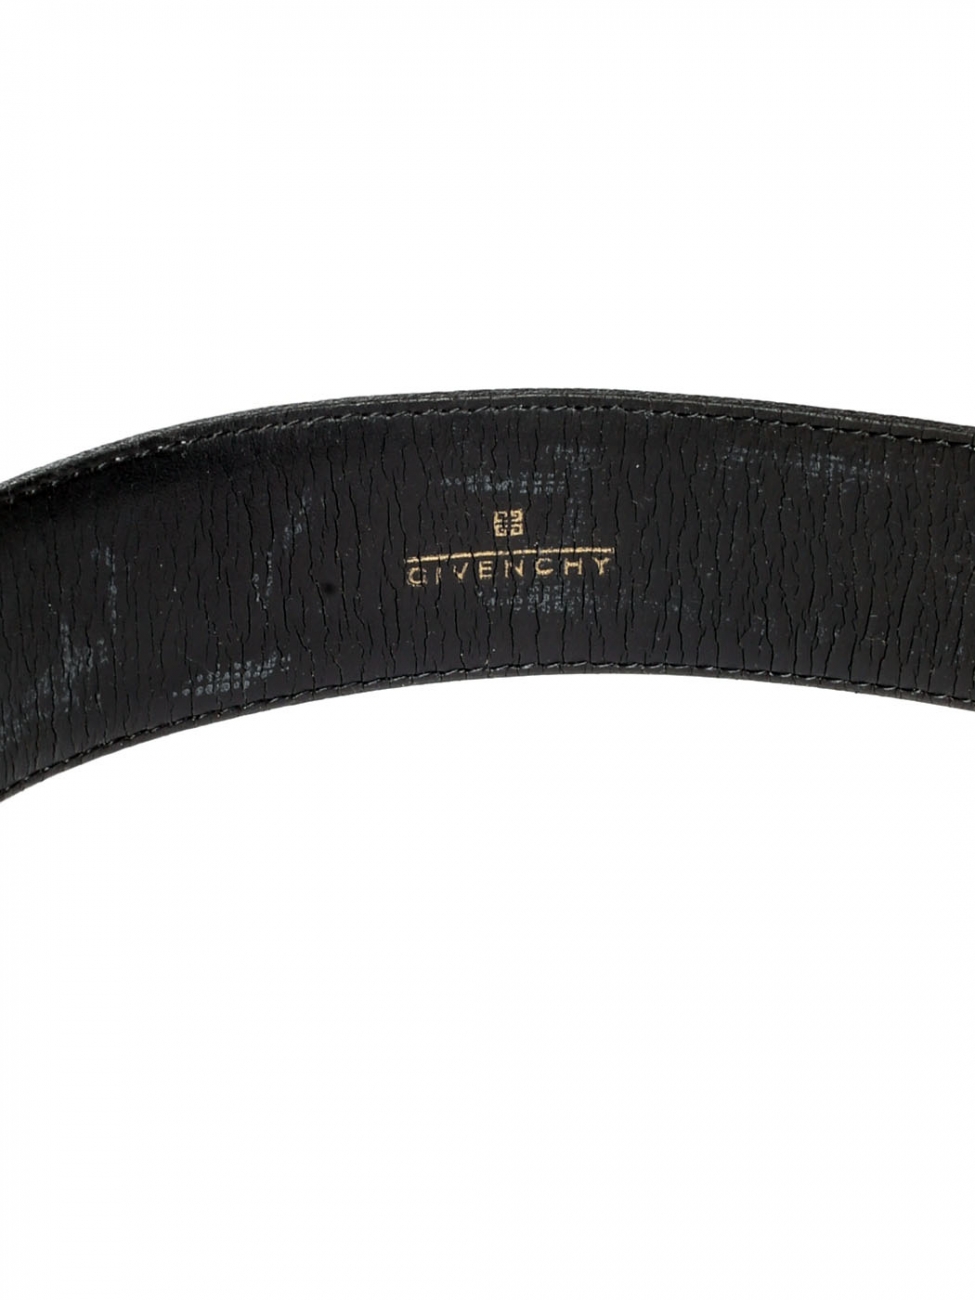 Boutique GIVENCHY Blue grey textured leather belt with signature